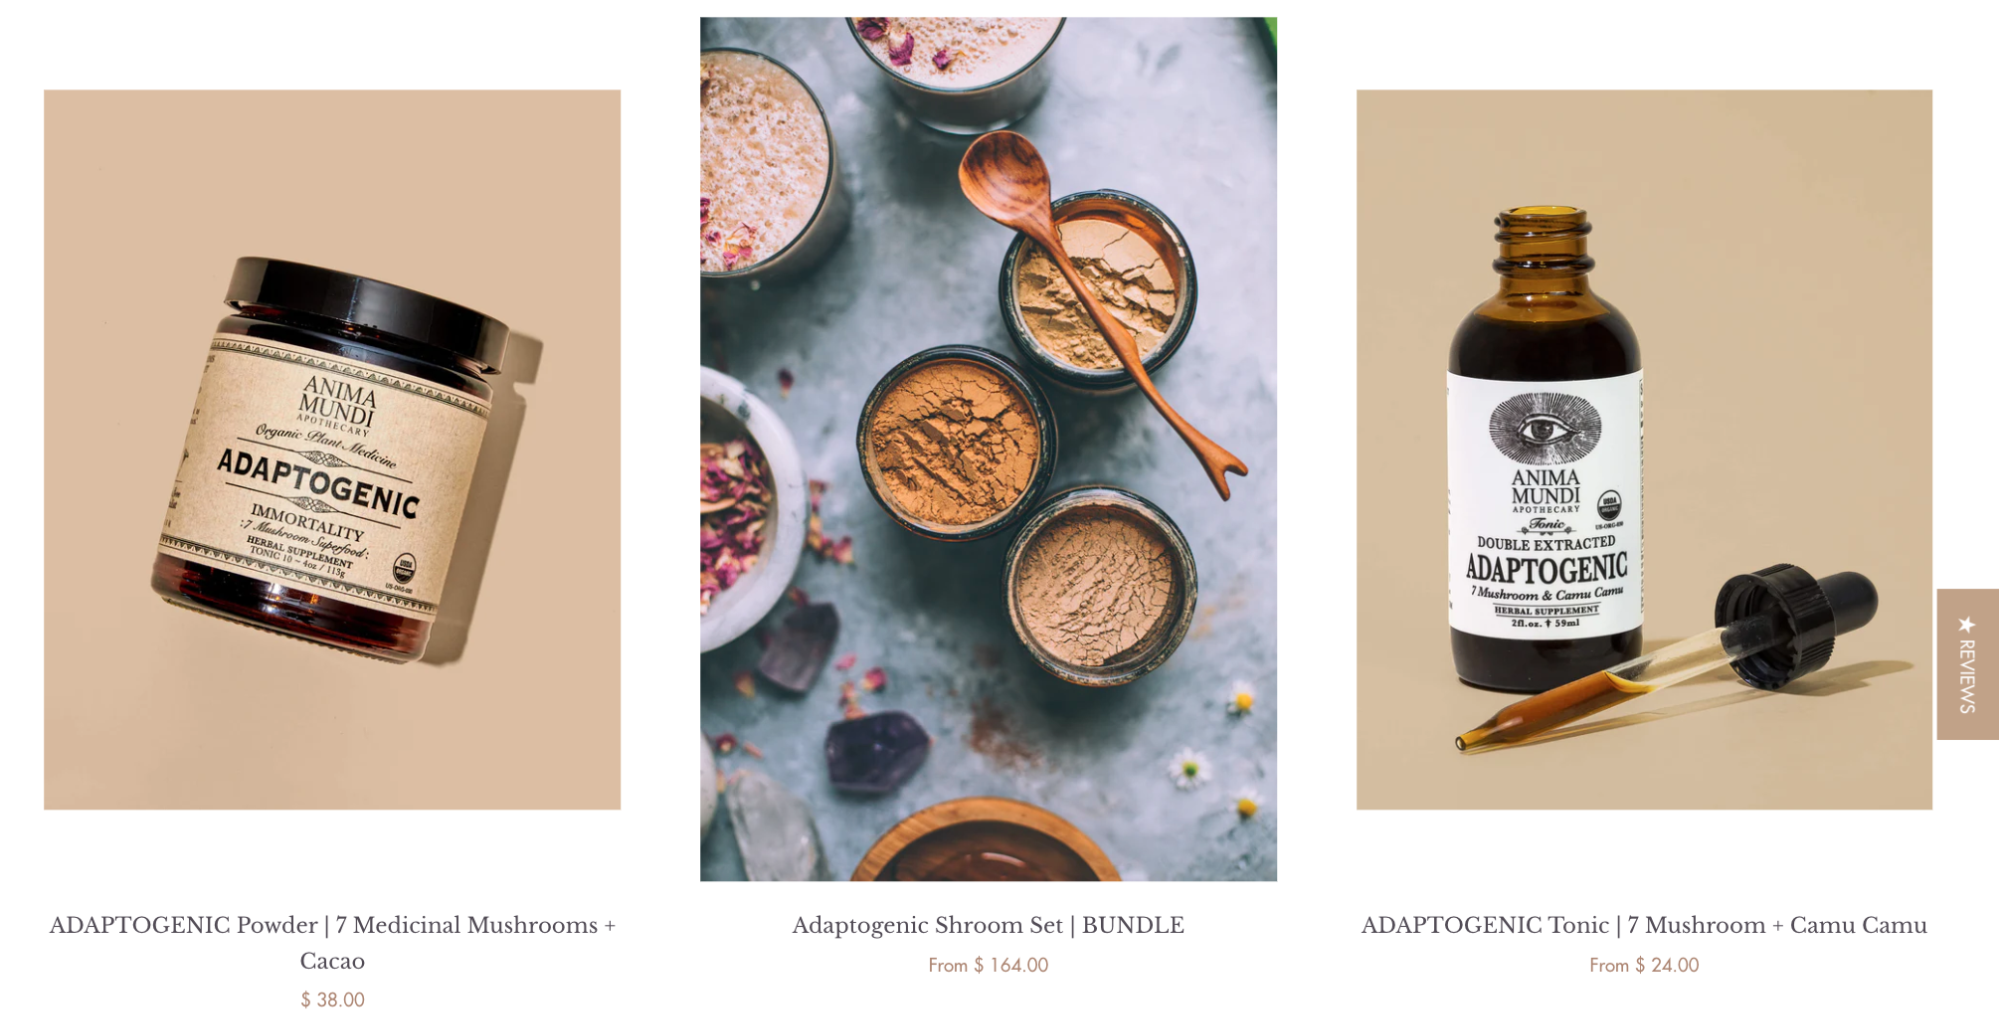 Three listings of adaptogenic products with photos from the Anima Mundi Apothecary website.